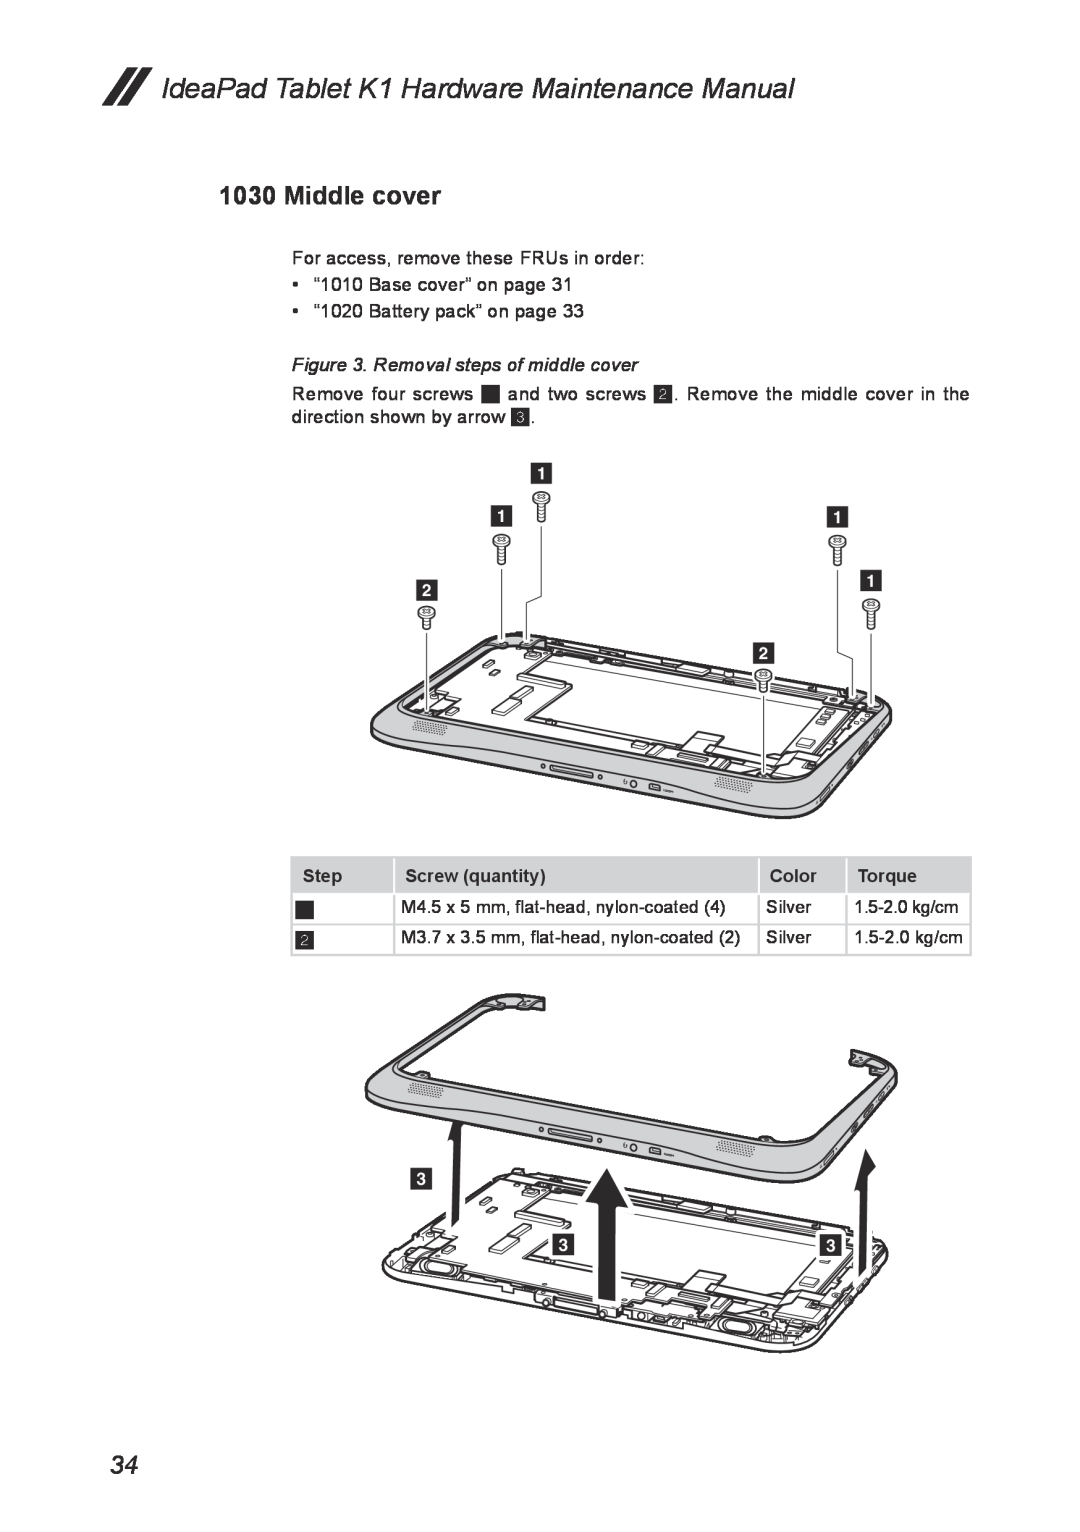 Lenovo Middle cover, Removal steps of middle cover, IdeaPad Tablet K1 Hardware Maintenance Manual, Step, Screw quantity 